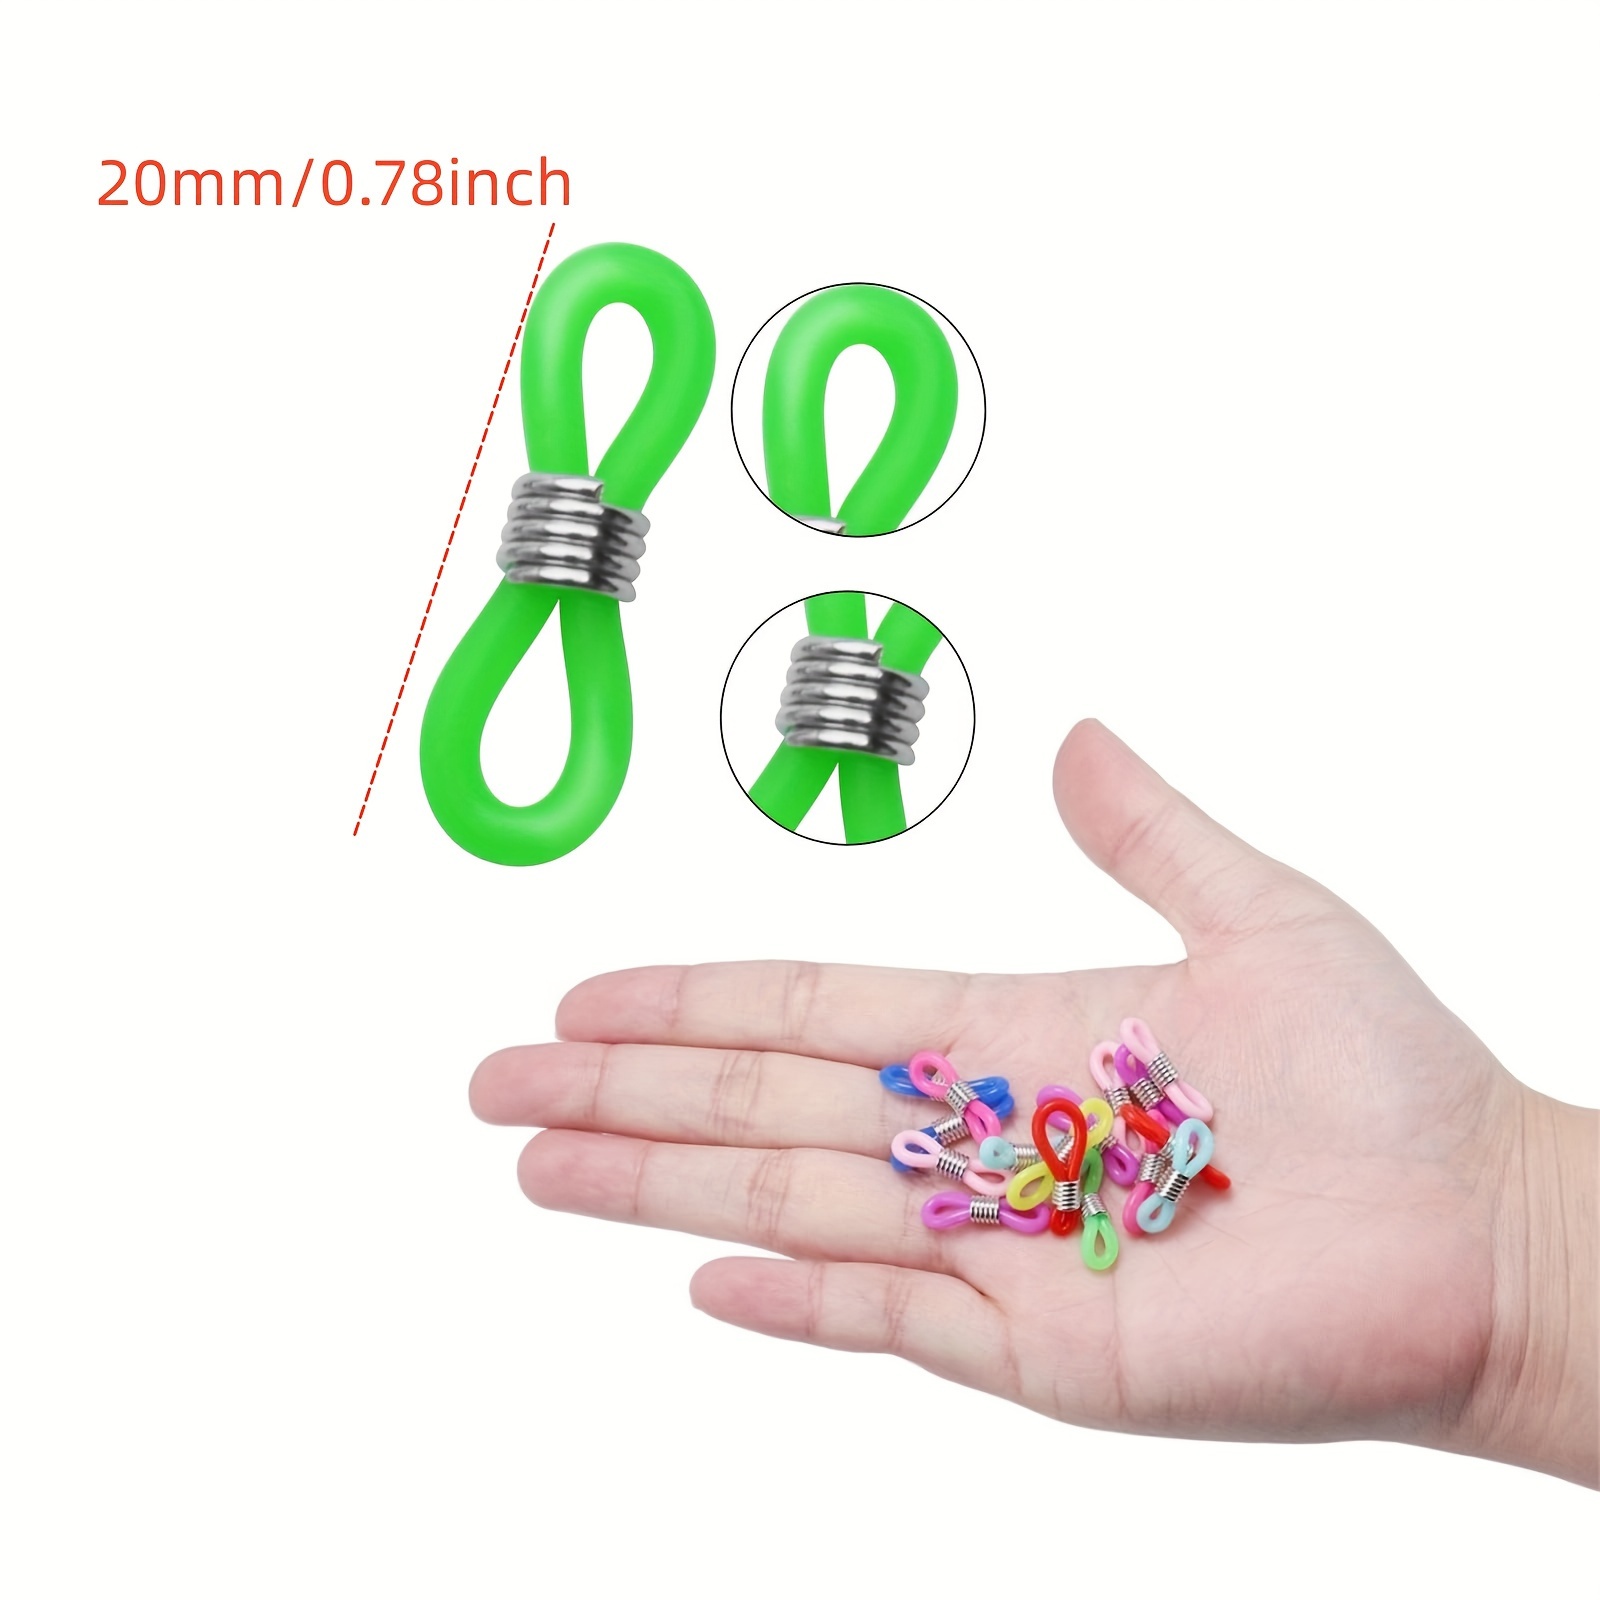 20 Pcs Knitting Needle Stoppers, Colorful Knitting Needle Protectors, Stitch Stopper, Knitting Accessories and Supplies, Stitch Protective Cover